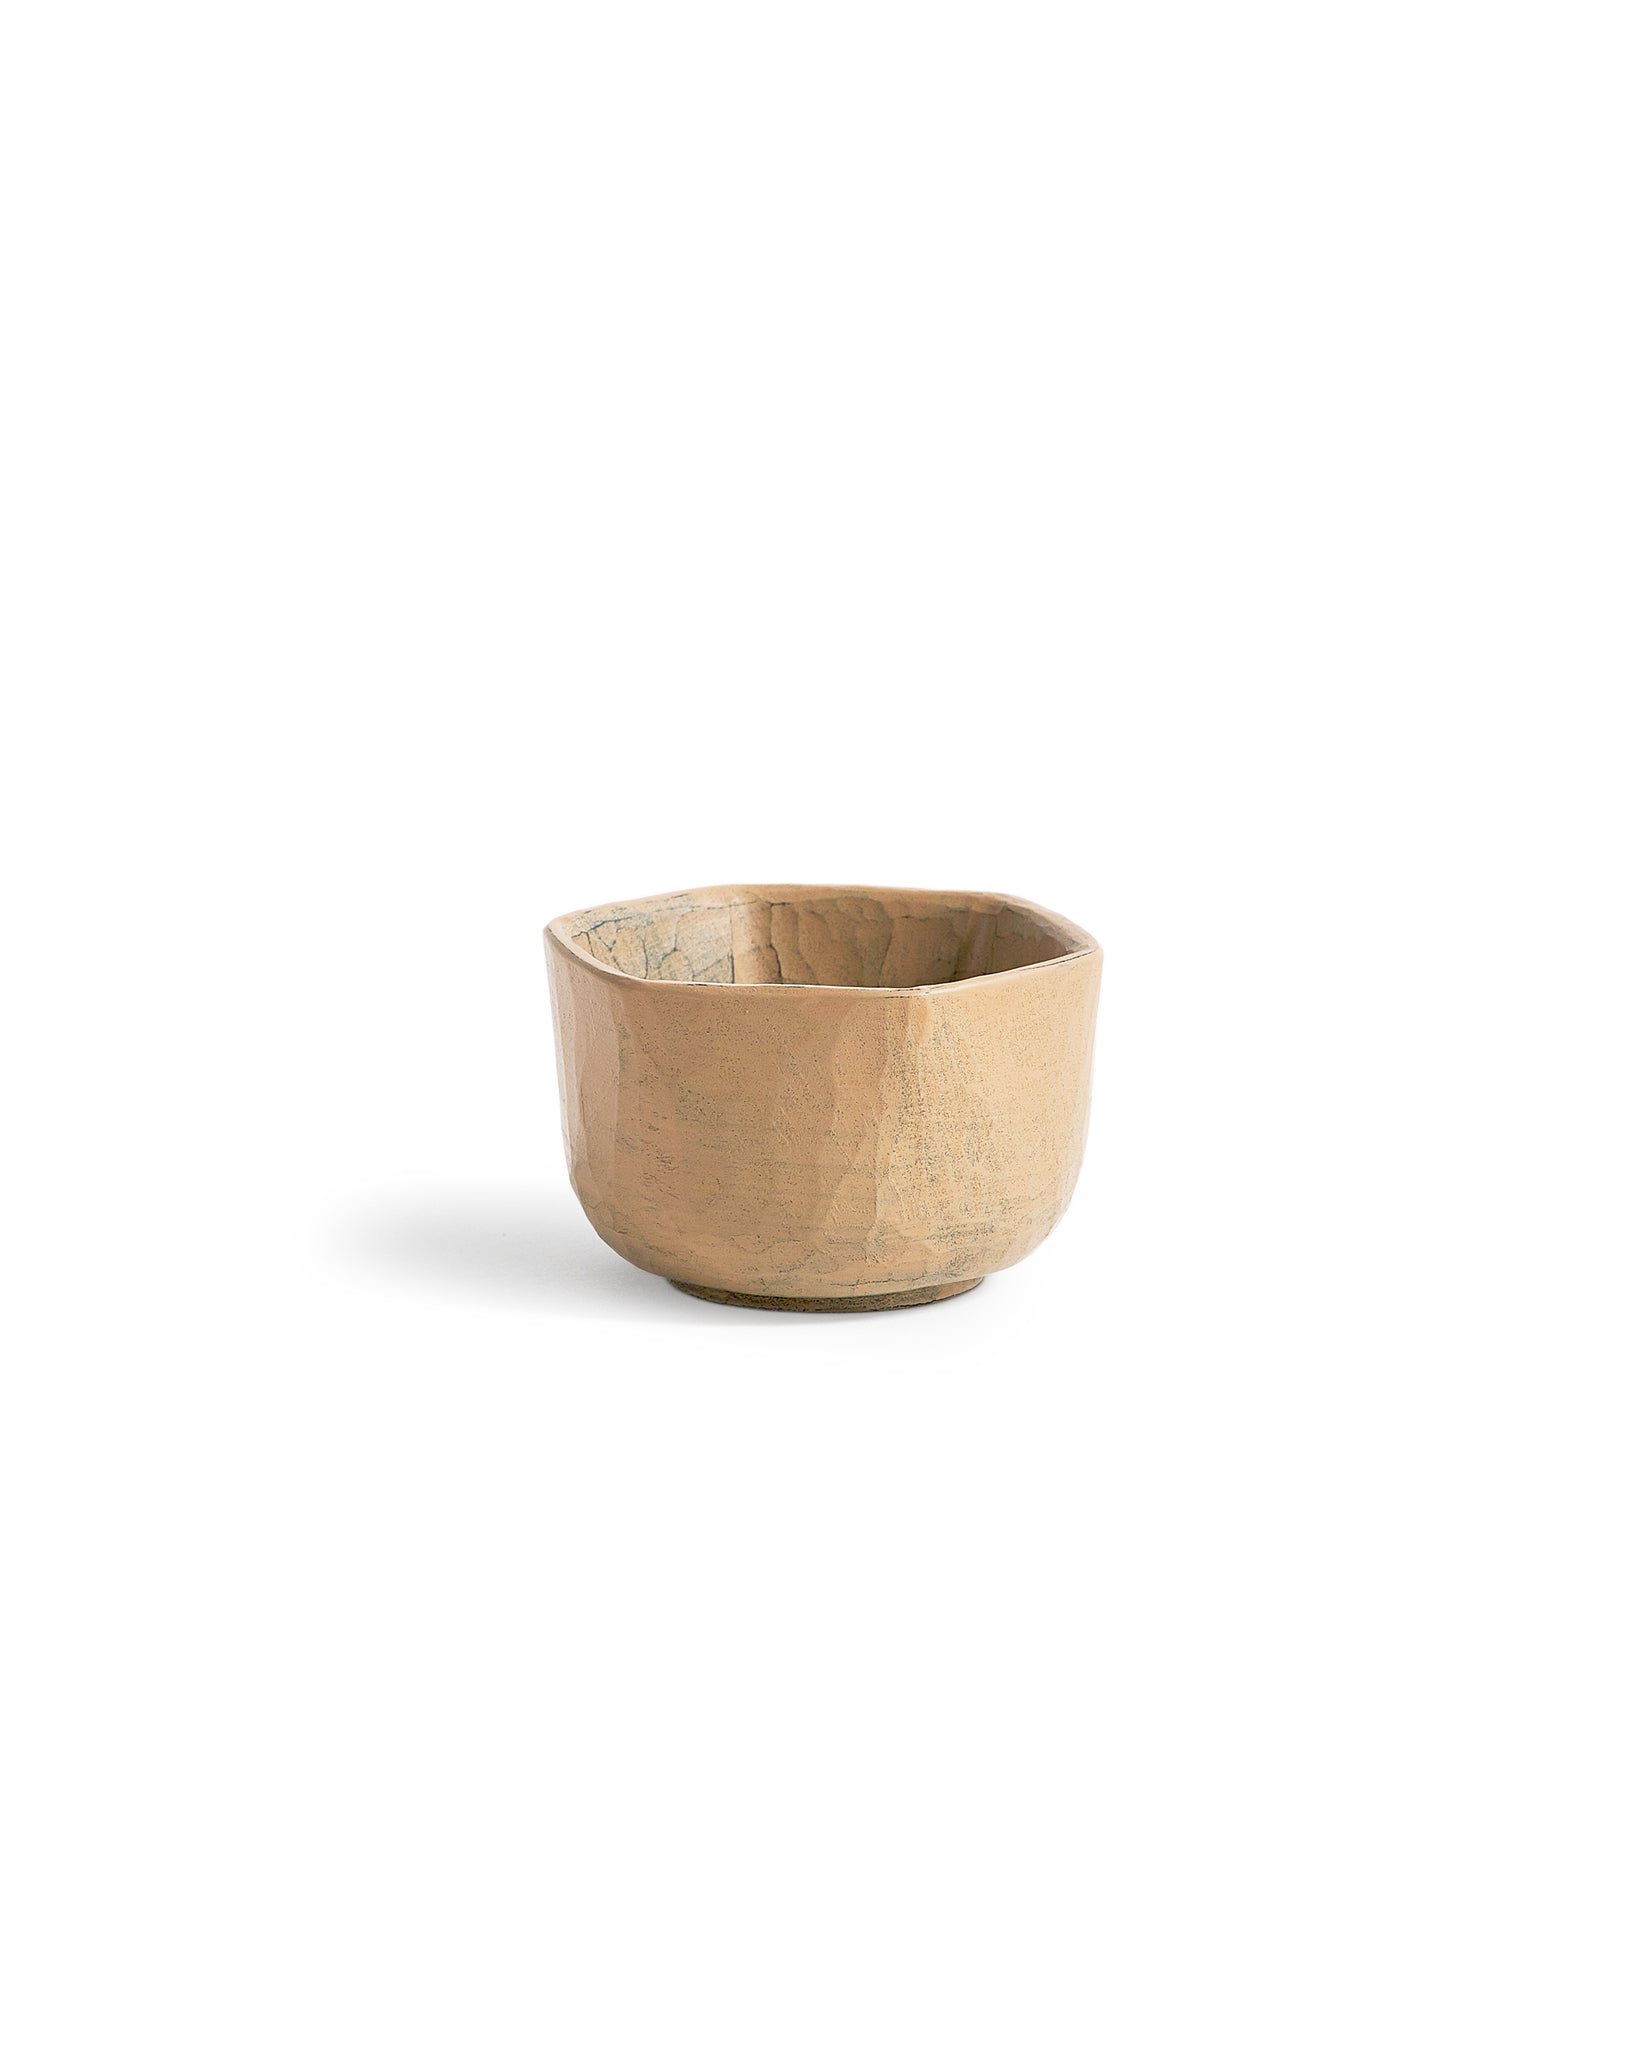 Zoomed out front view of Hexagonal White Urushi Sake Cup by Ryuji Mitani against white background.